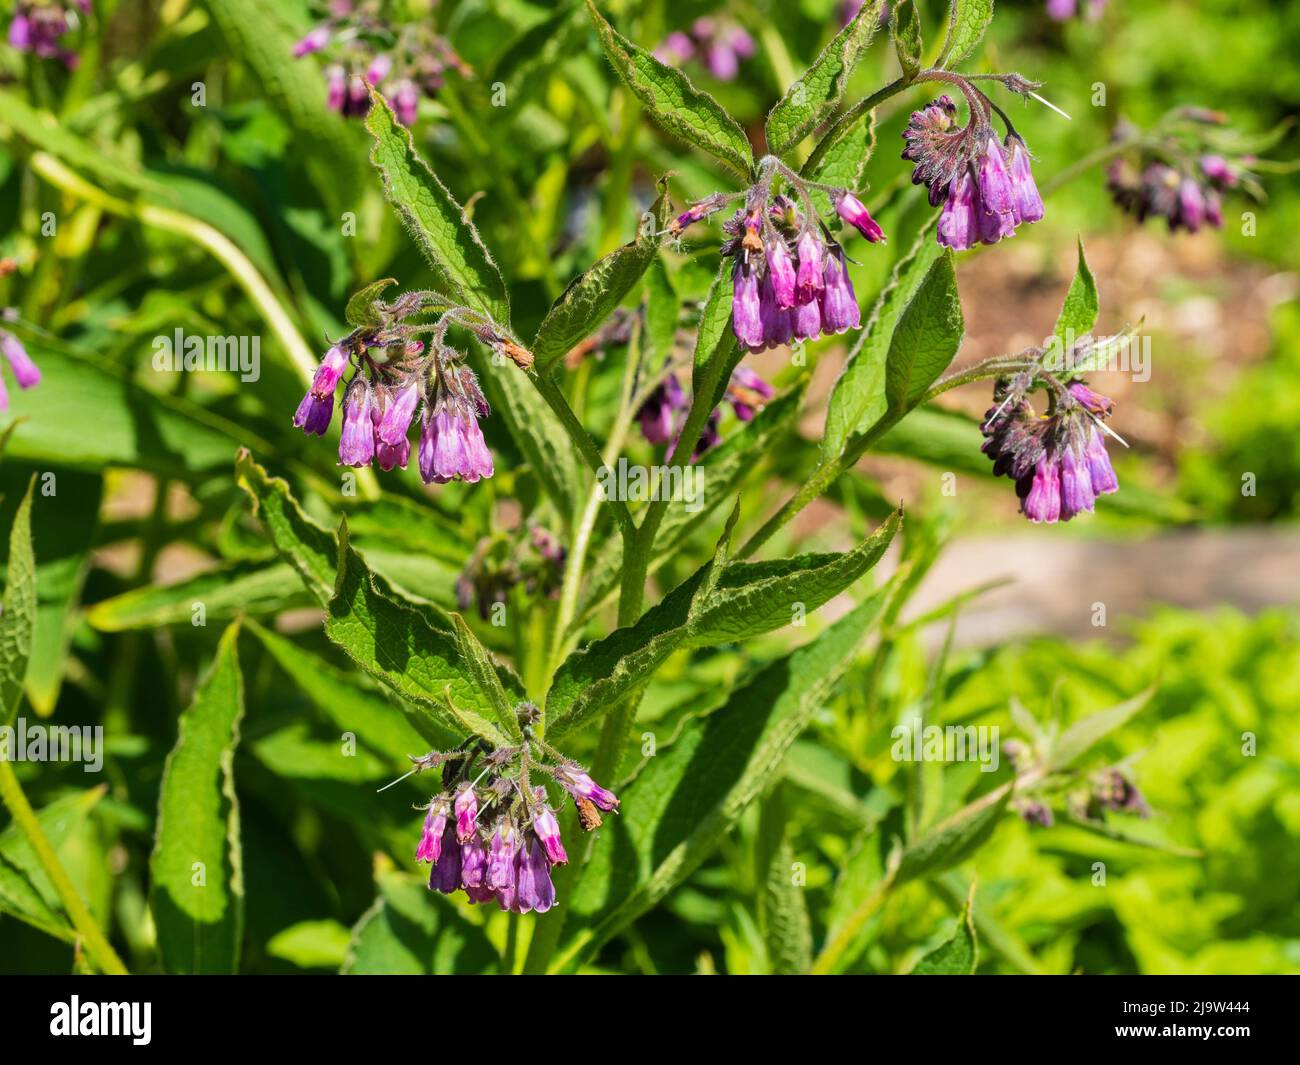 Flowers and foliage of the early summer flowering herb common comfrey, Symphytum officinale Stock Photo